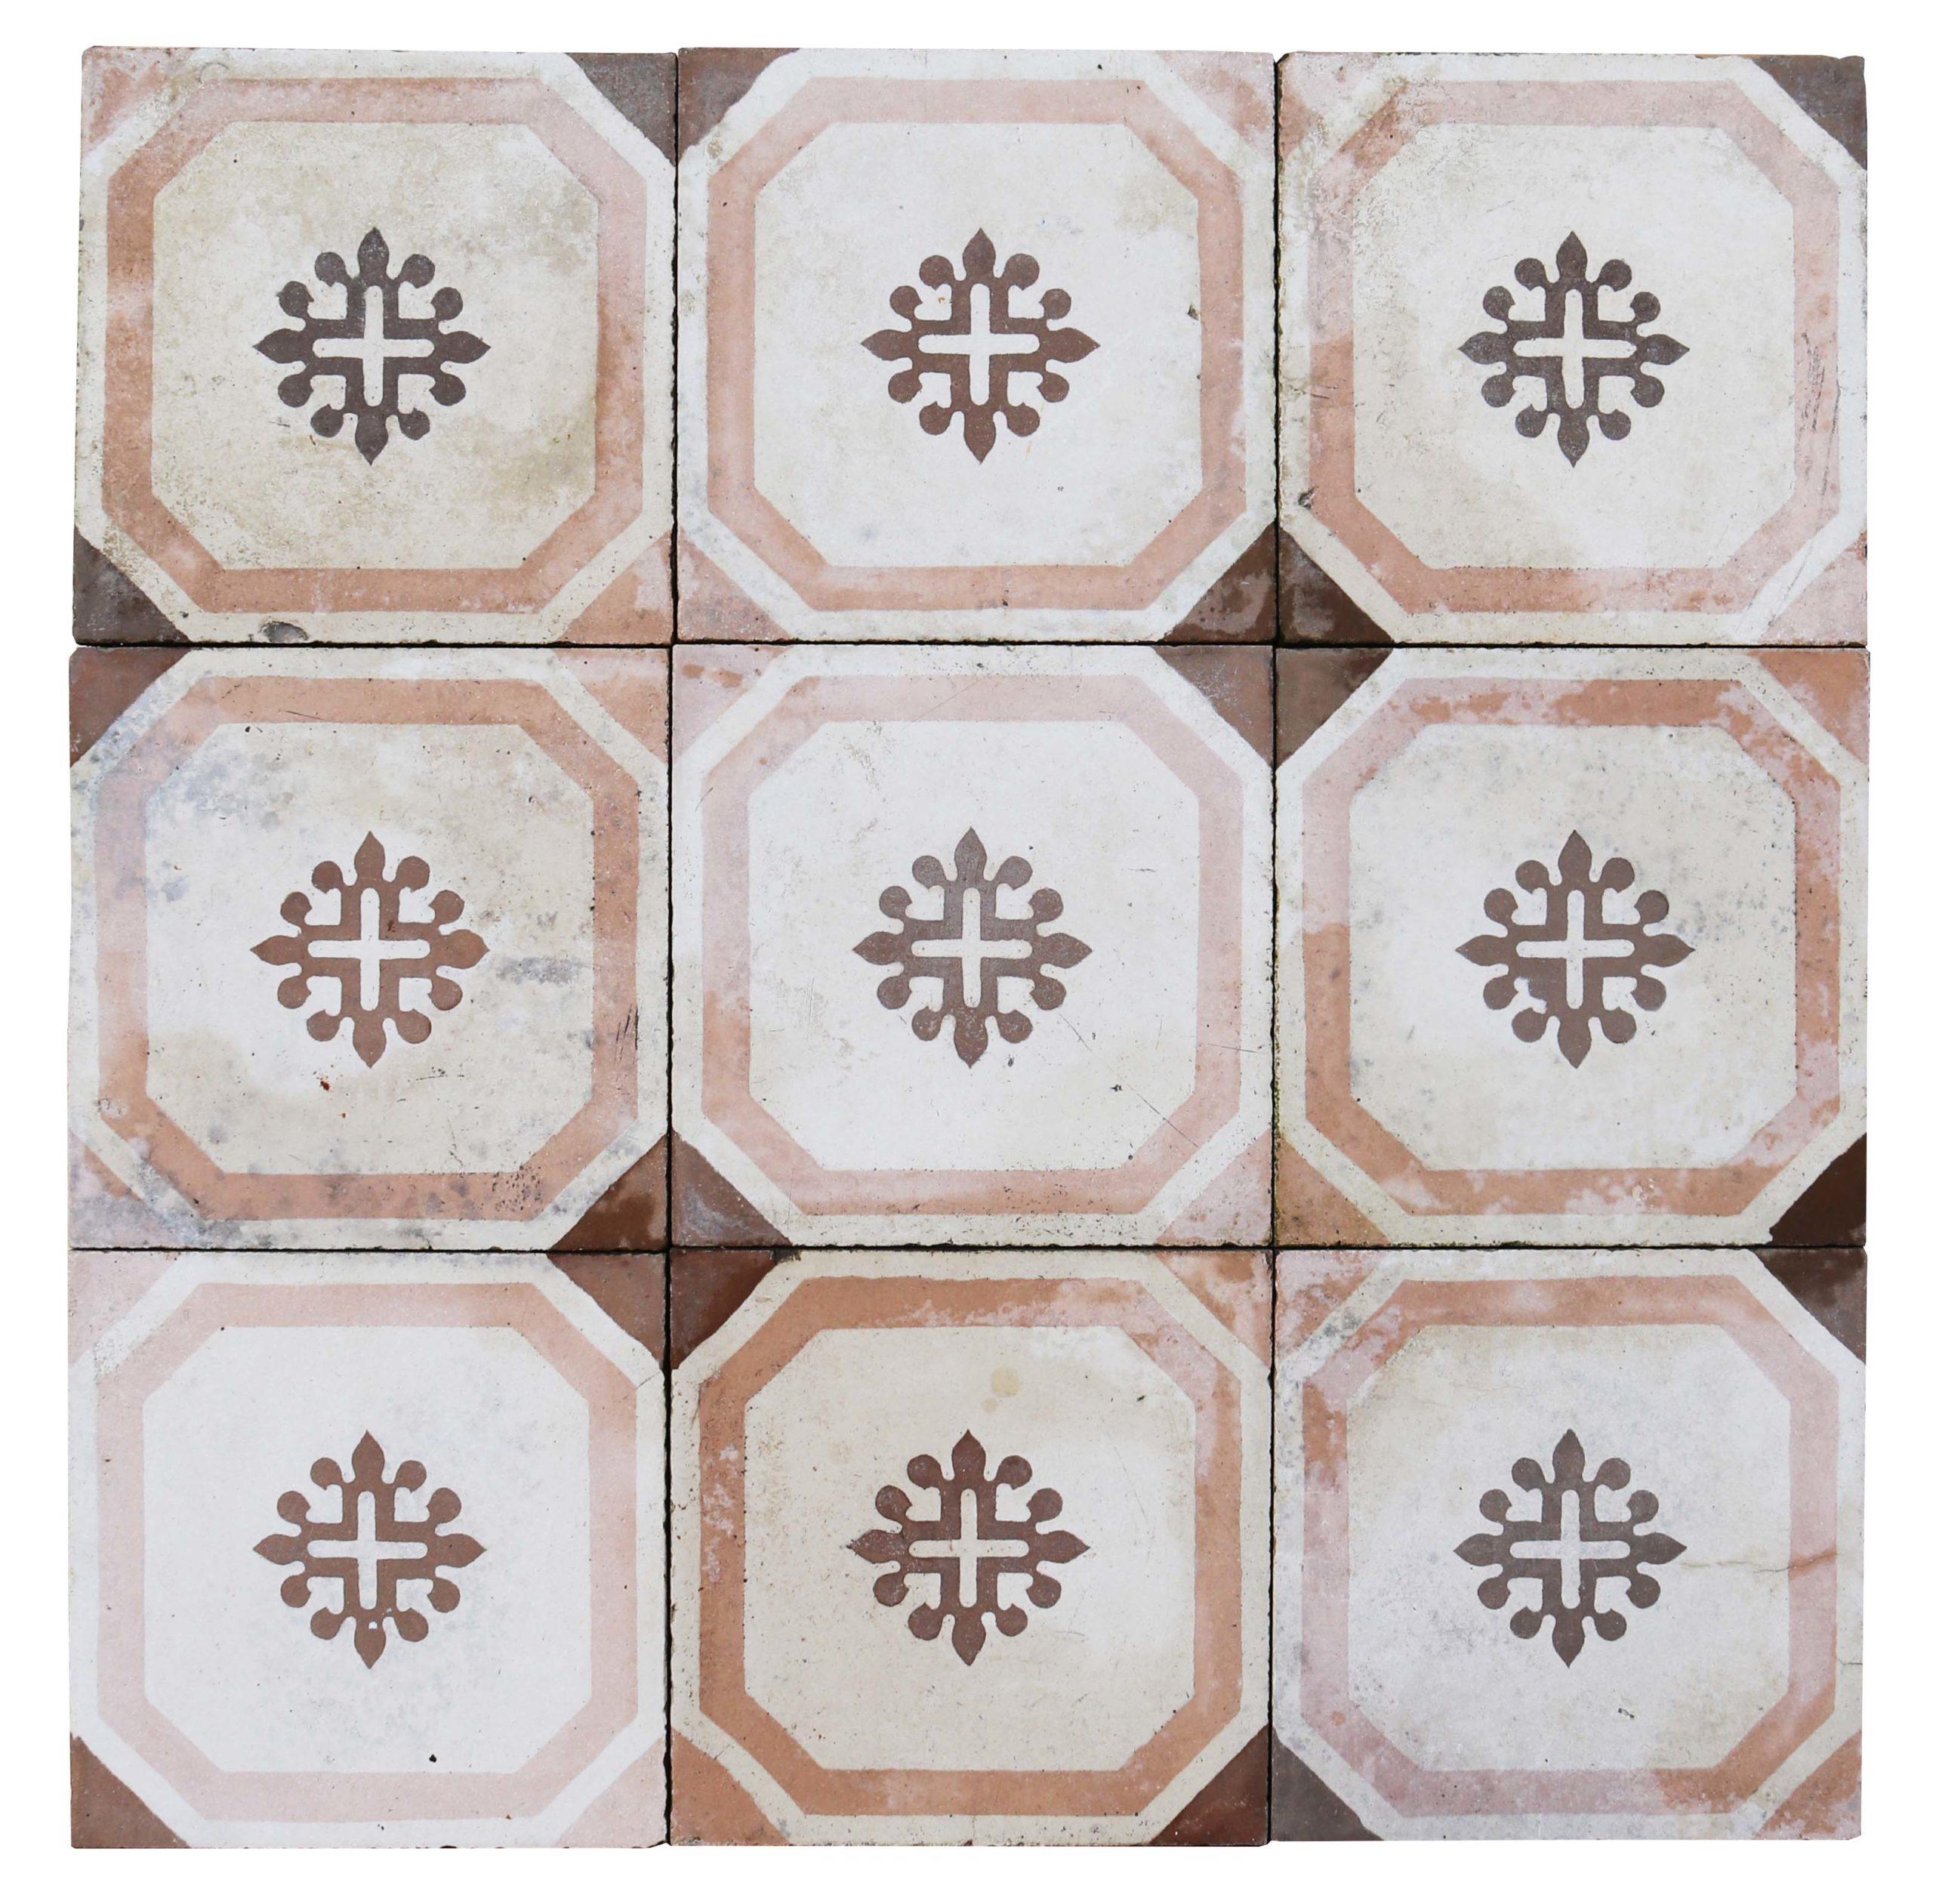 A batch of reclaimed patterned cement floor tiles. This batch will cover six and a half square meters.

A useful size batch of reclaimed Spanish pattered tiles. These are suitable for use on floors, walls, splash-backs, etc. 163 tiles in total.